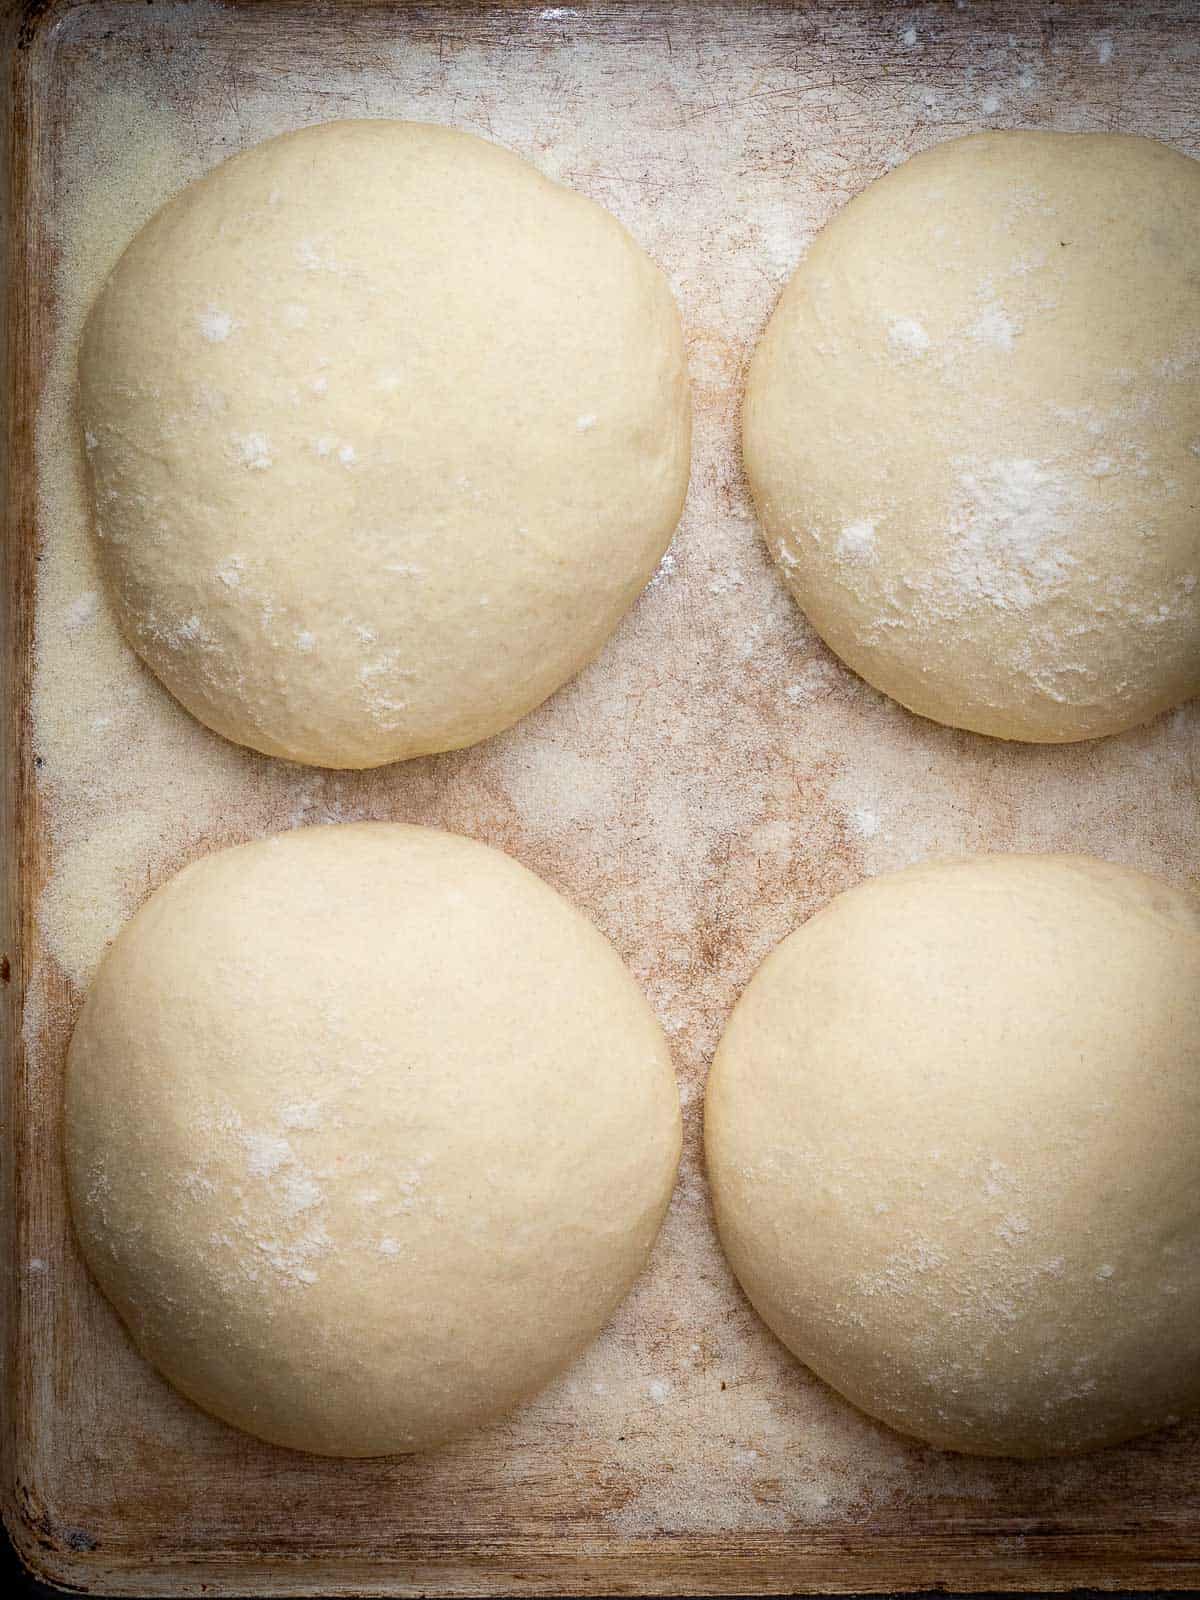 pizza dough proofing